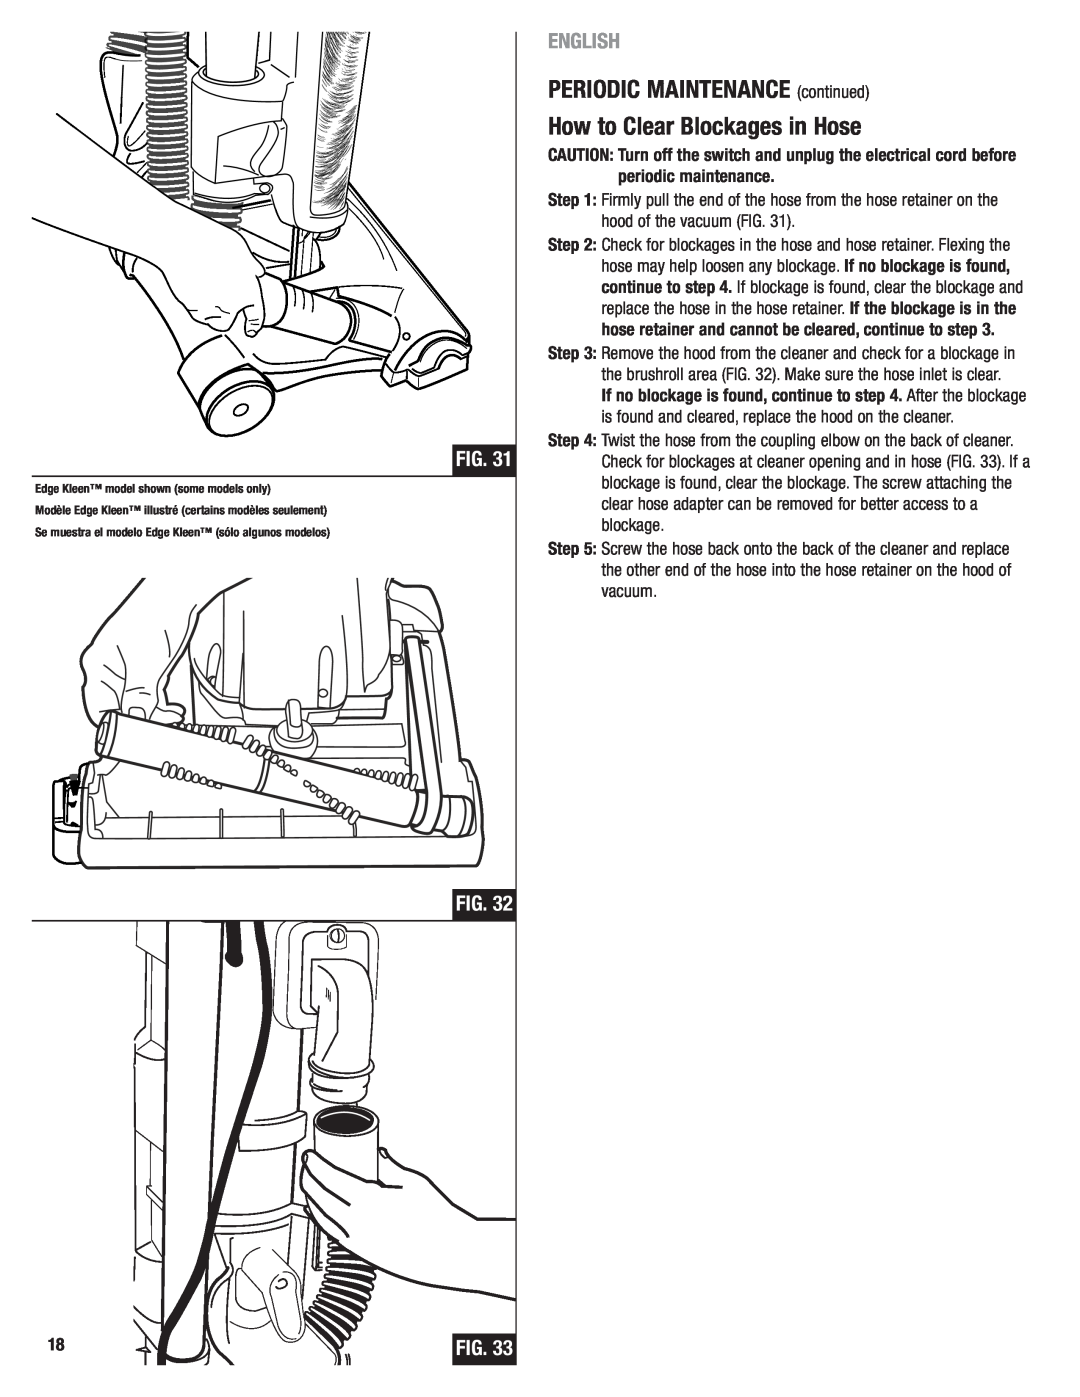 Eureka 2940 manual PERIODIC MAINTENANCE continued How to Clear Blockages in Hose, English 